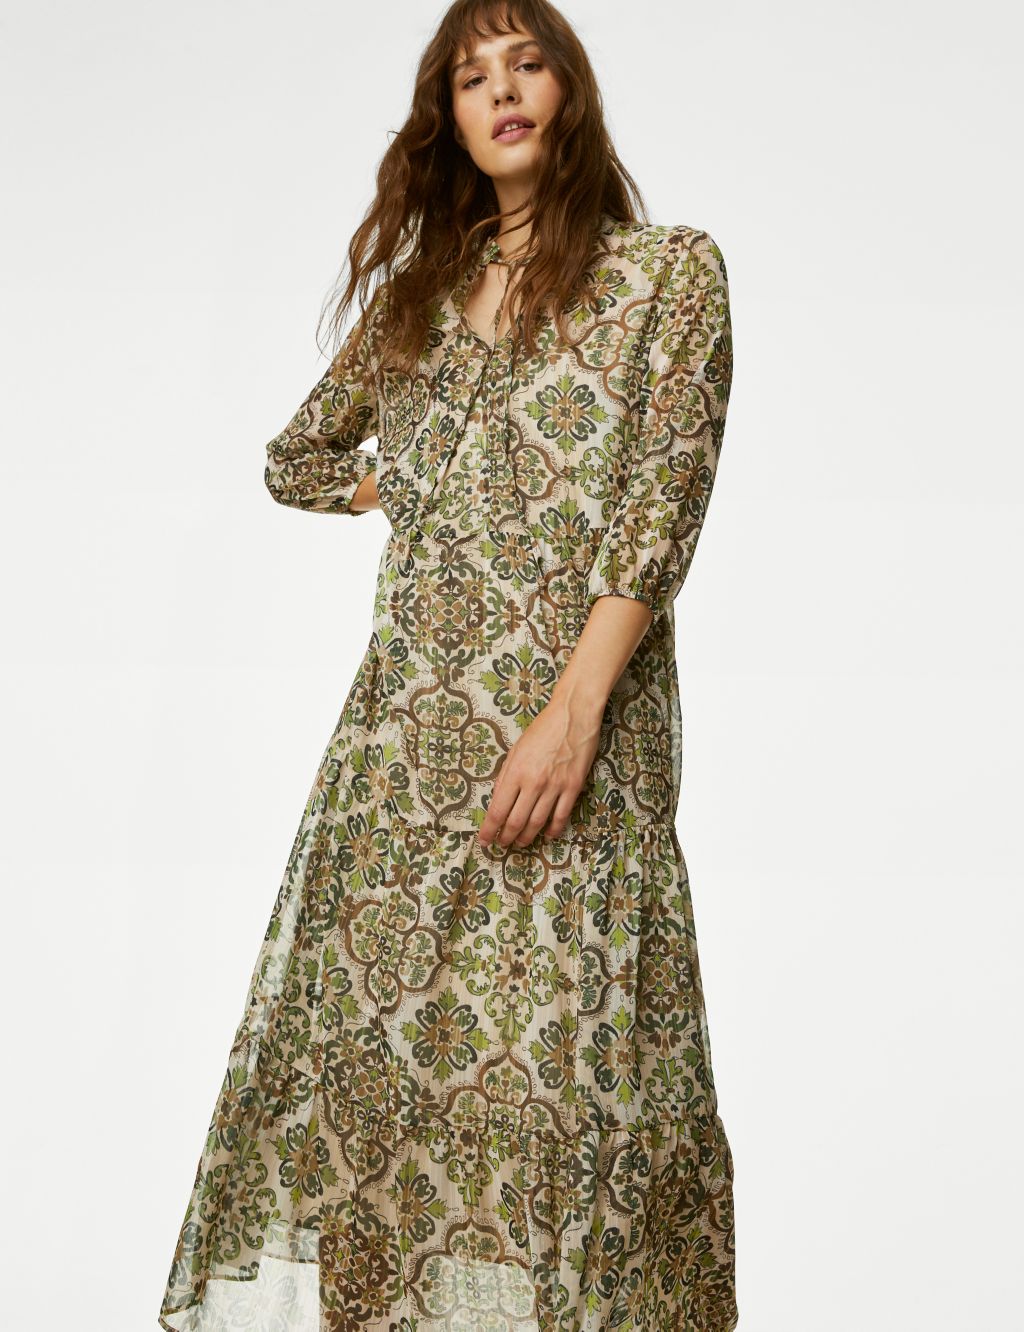 Printed V-Neck Midaxi Tiered Dress image 1